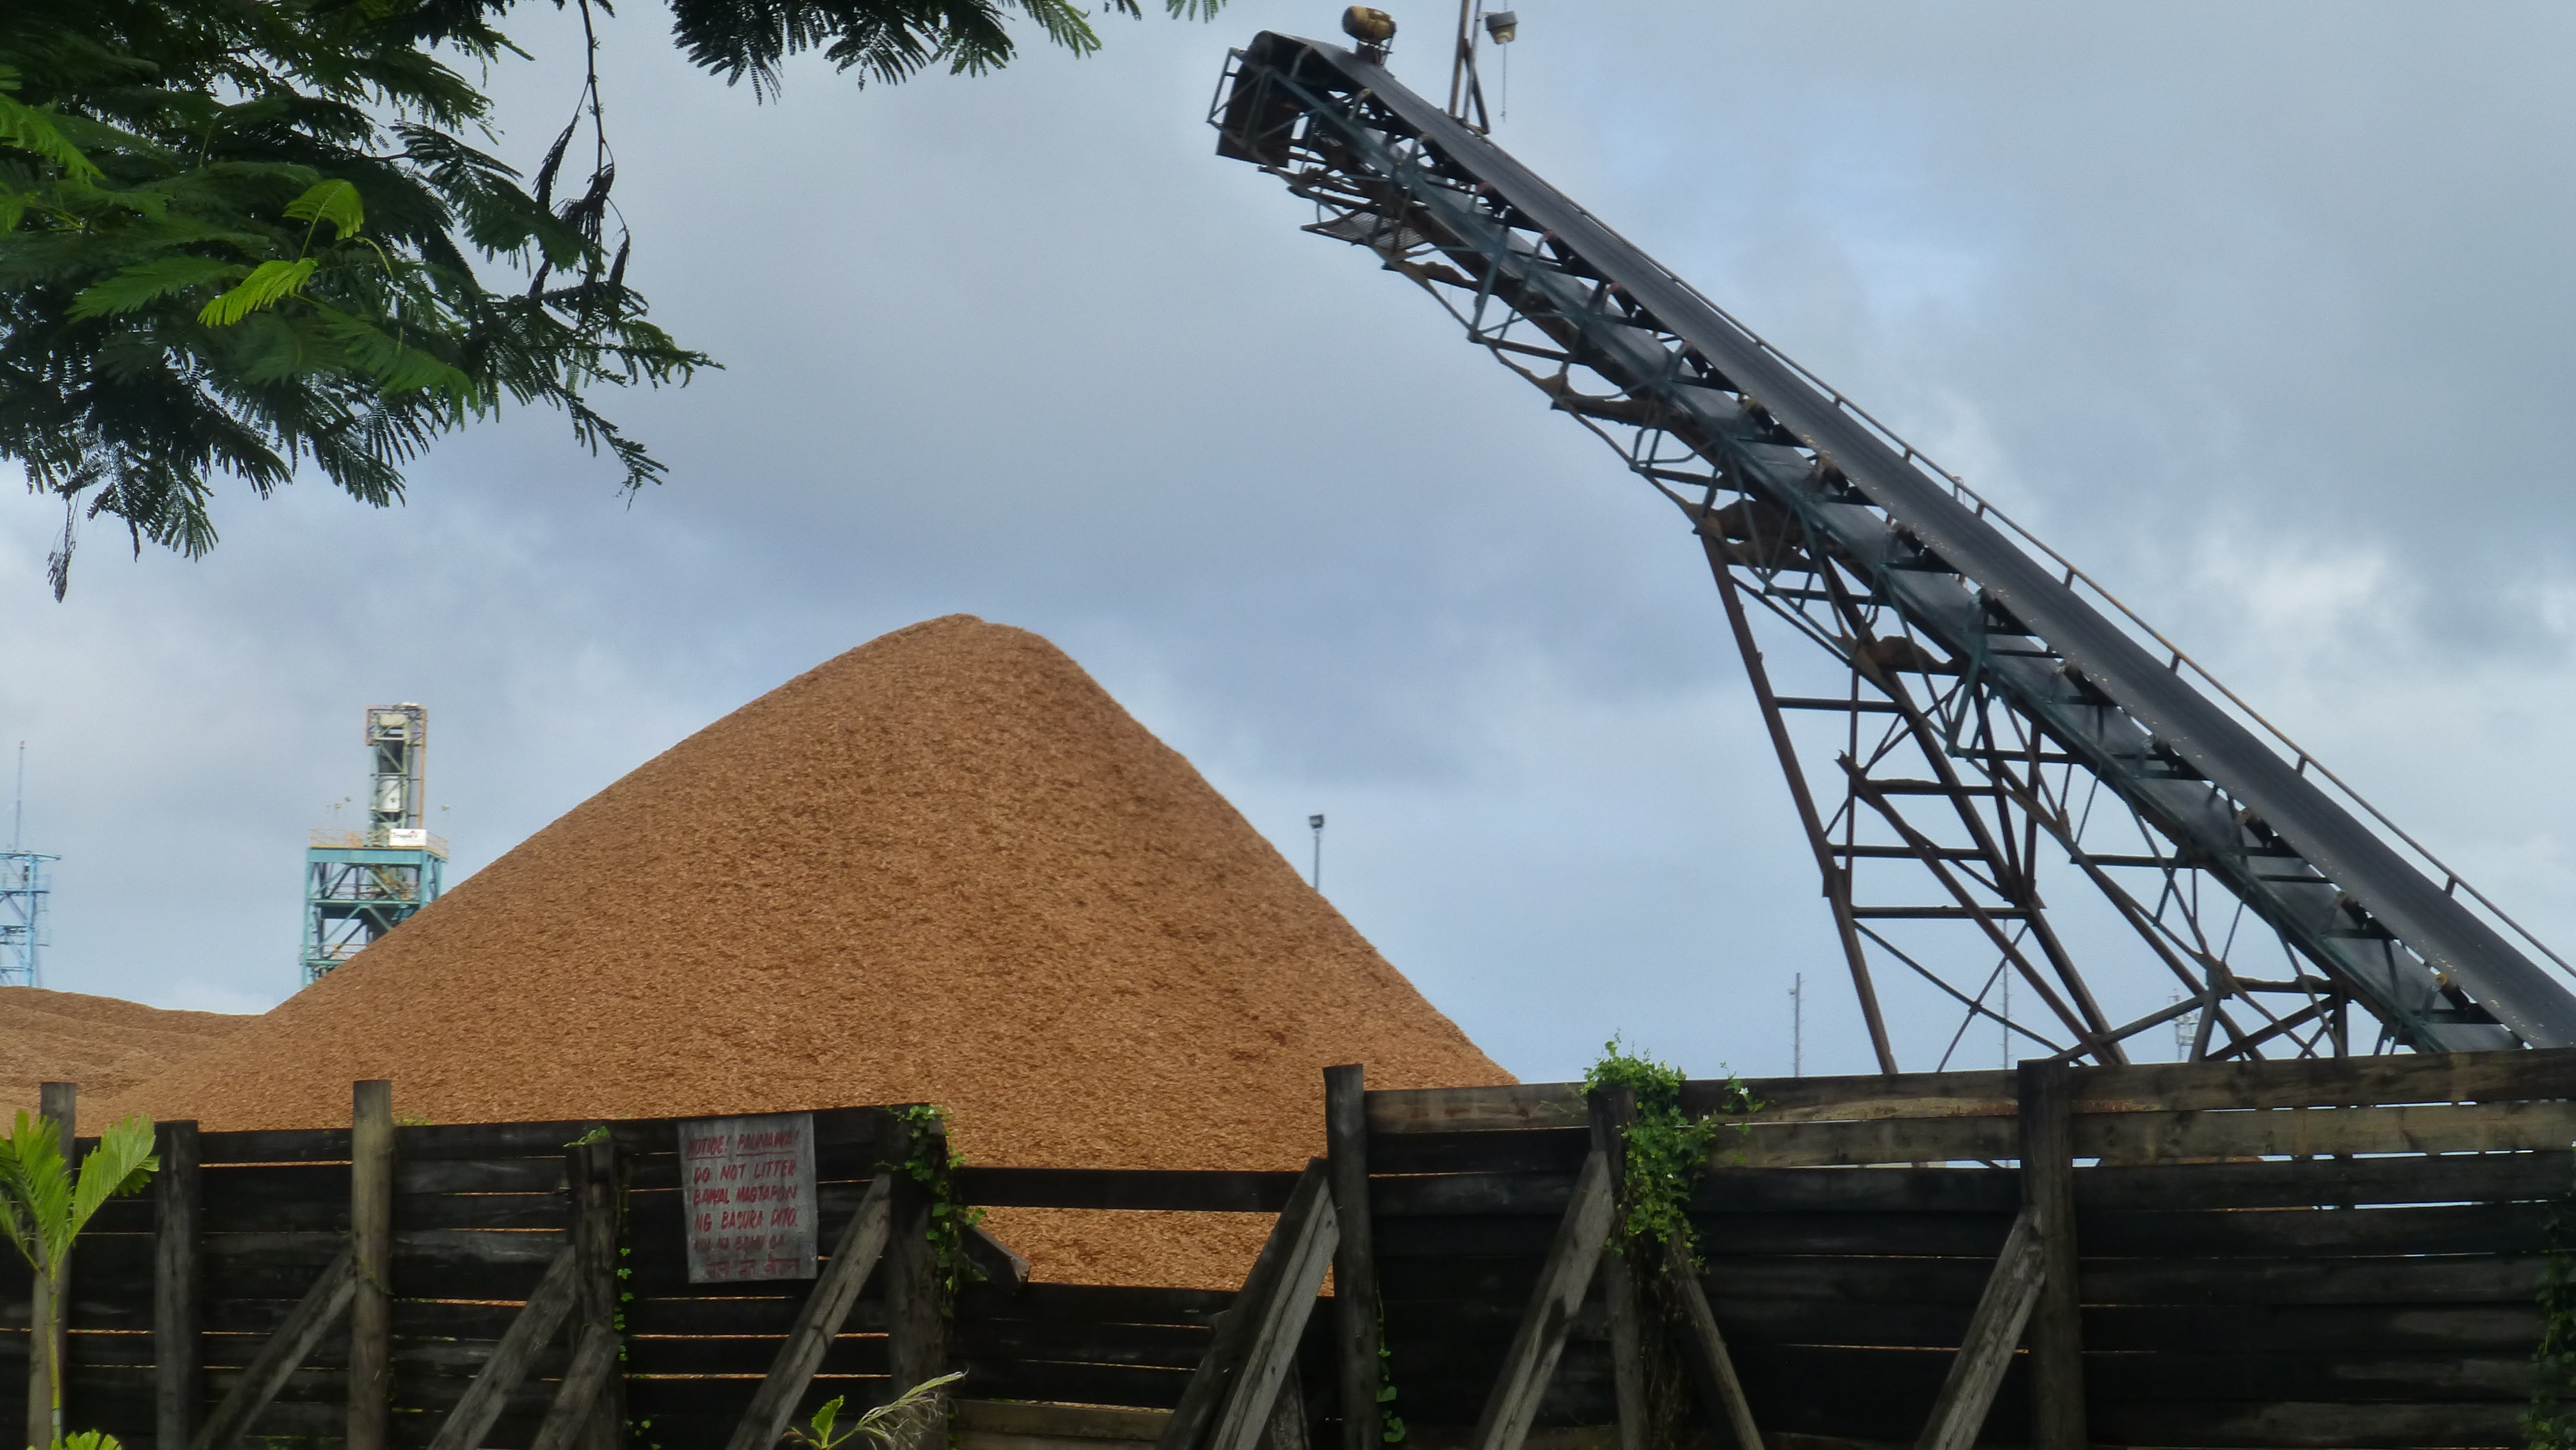 Sugar refinery at Lautoka, Fiji. Lautoka Sugar Mill opened in 1903 and is now the largest sugar mill in the southern hemisphere. Photo taken on March 16, 2013.